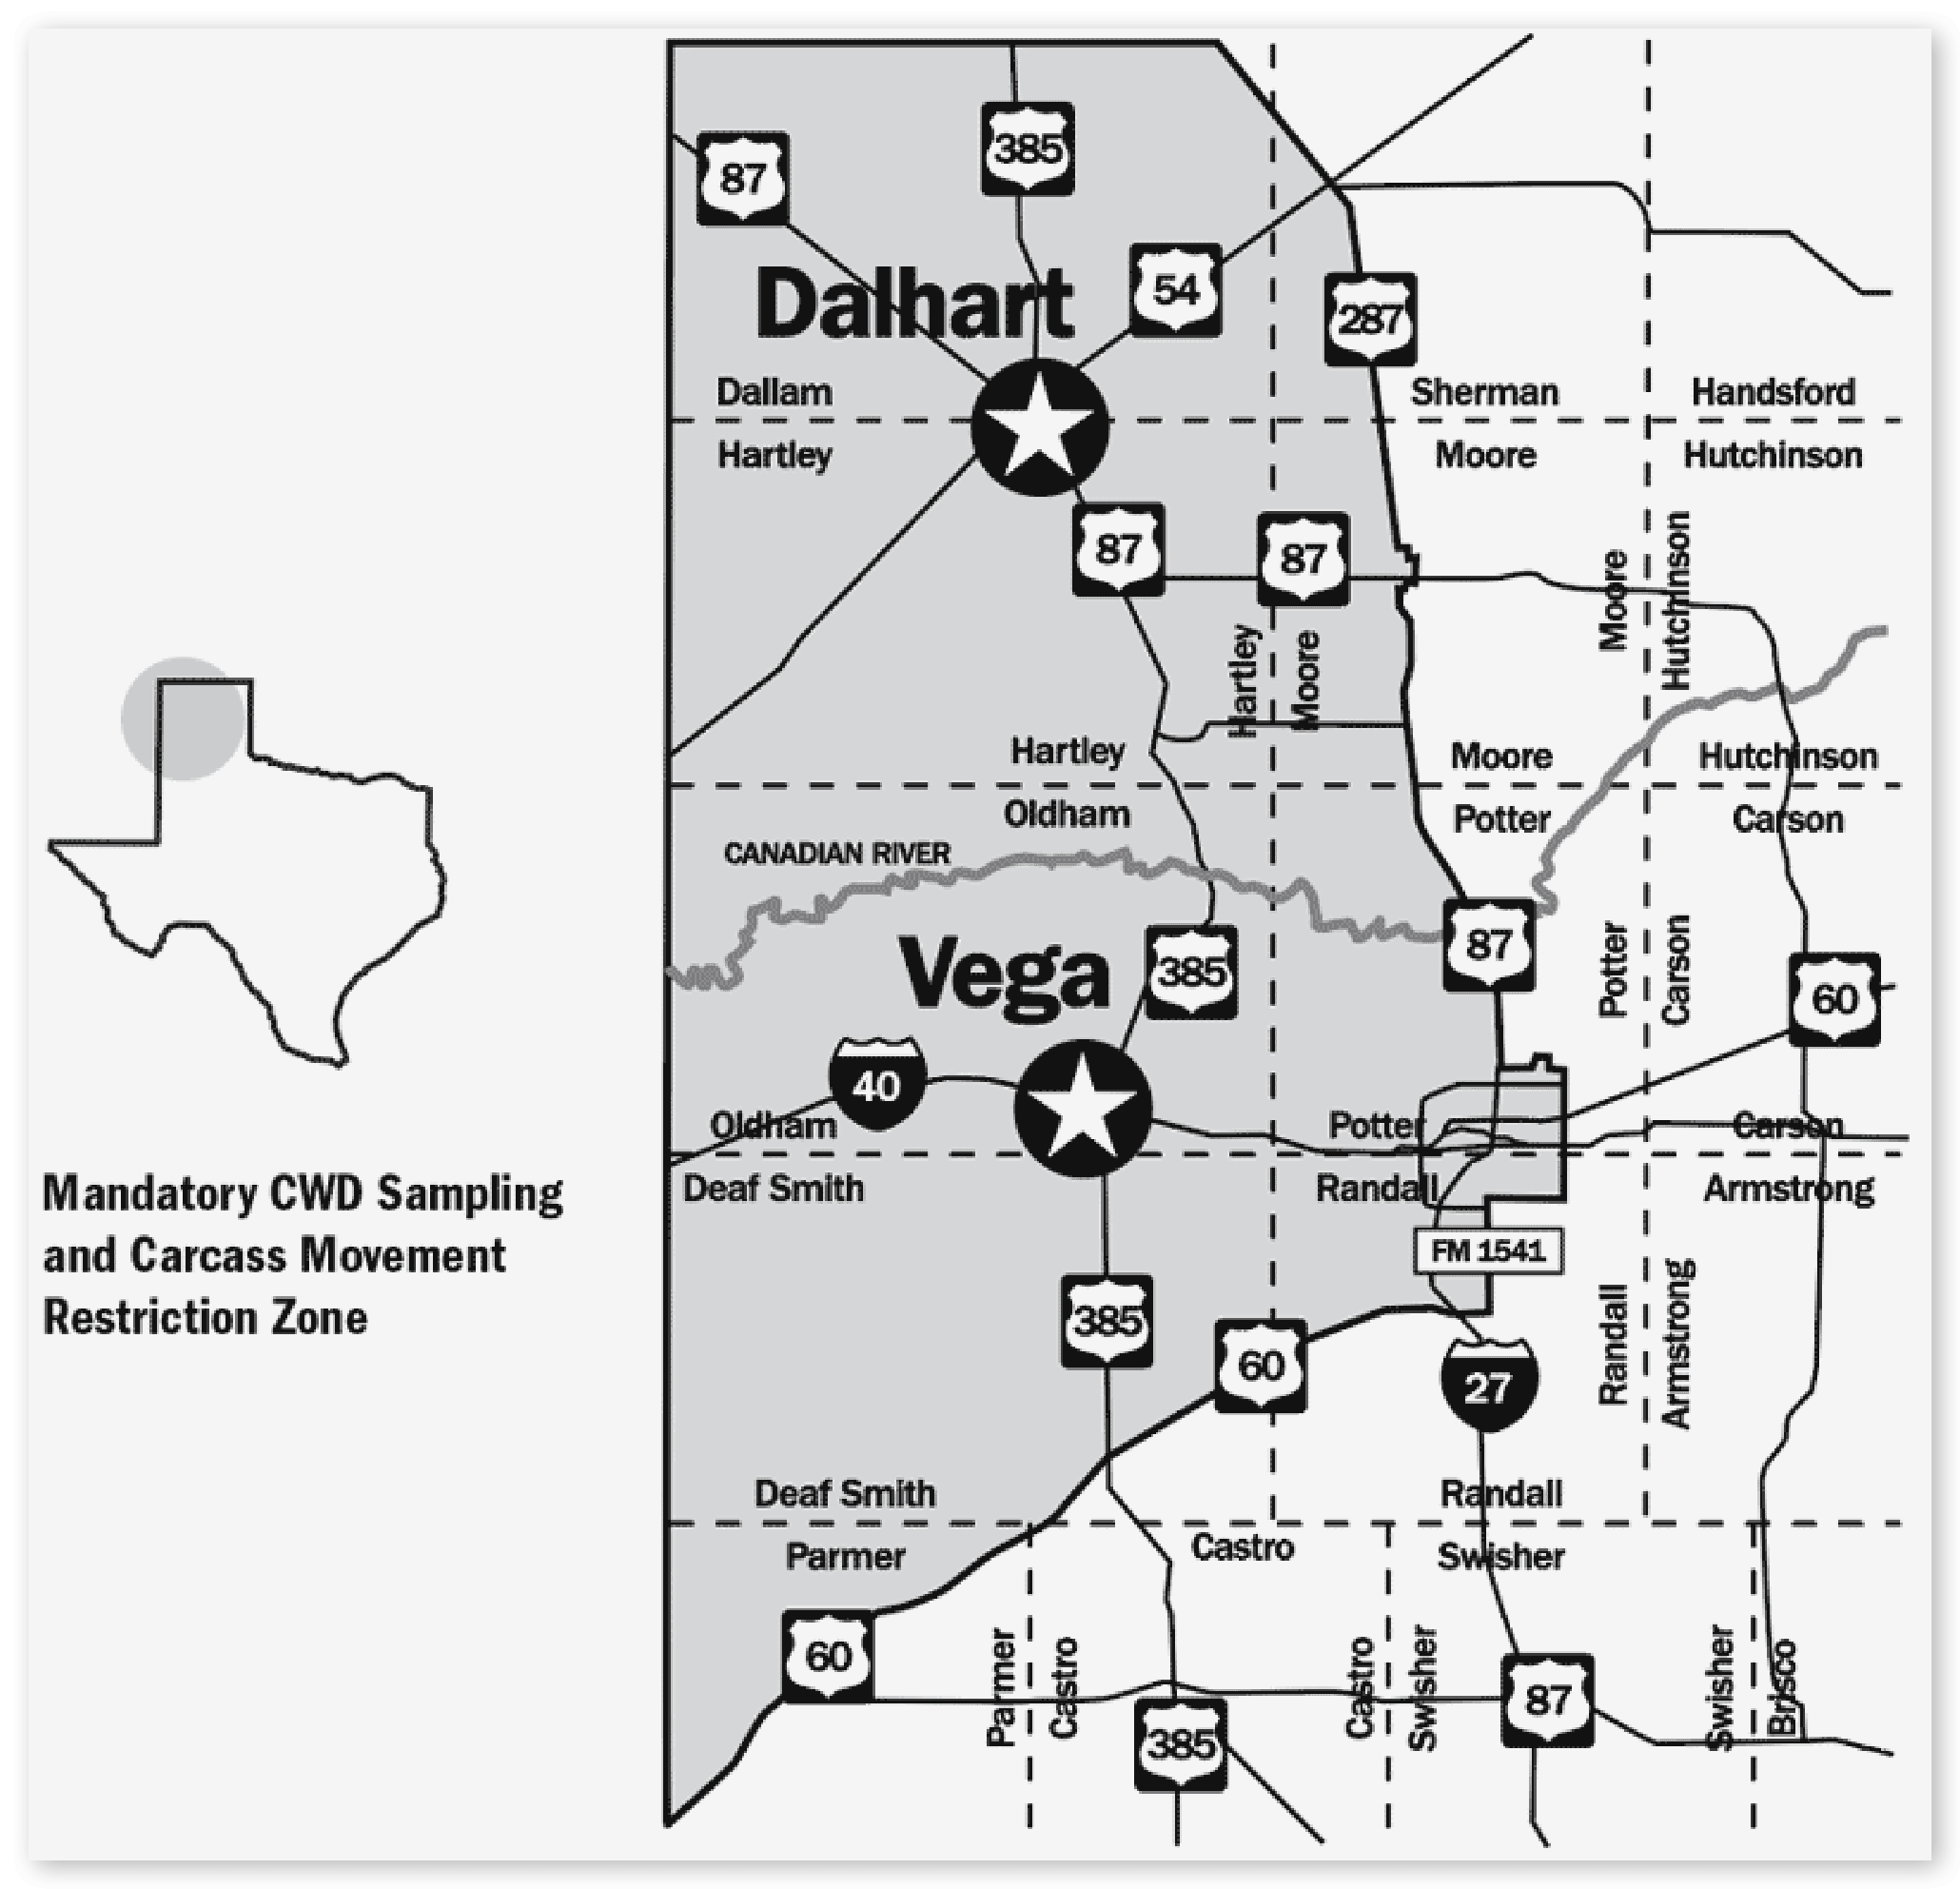 Mandatory CWD Sampling and Carcass Movement Restriction Zone in areas around Dalhart and Vega